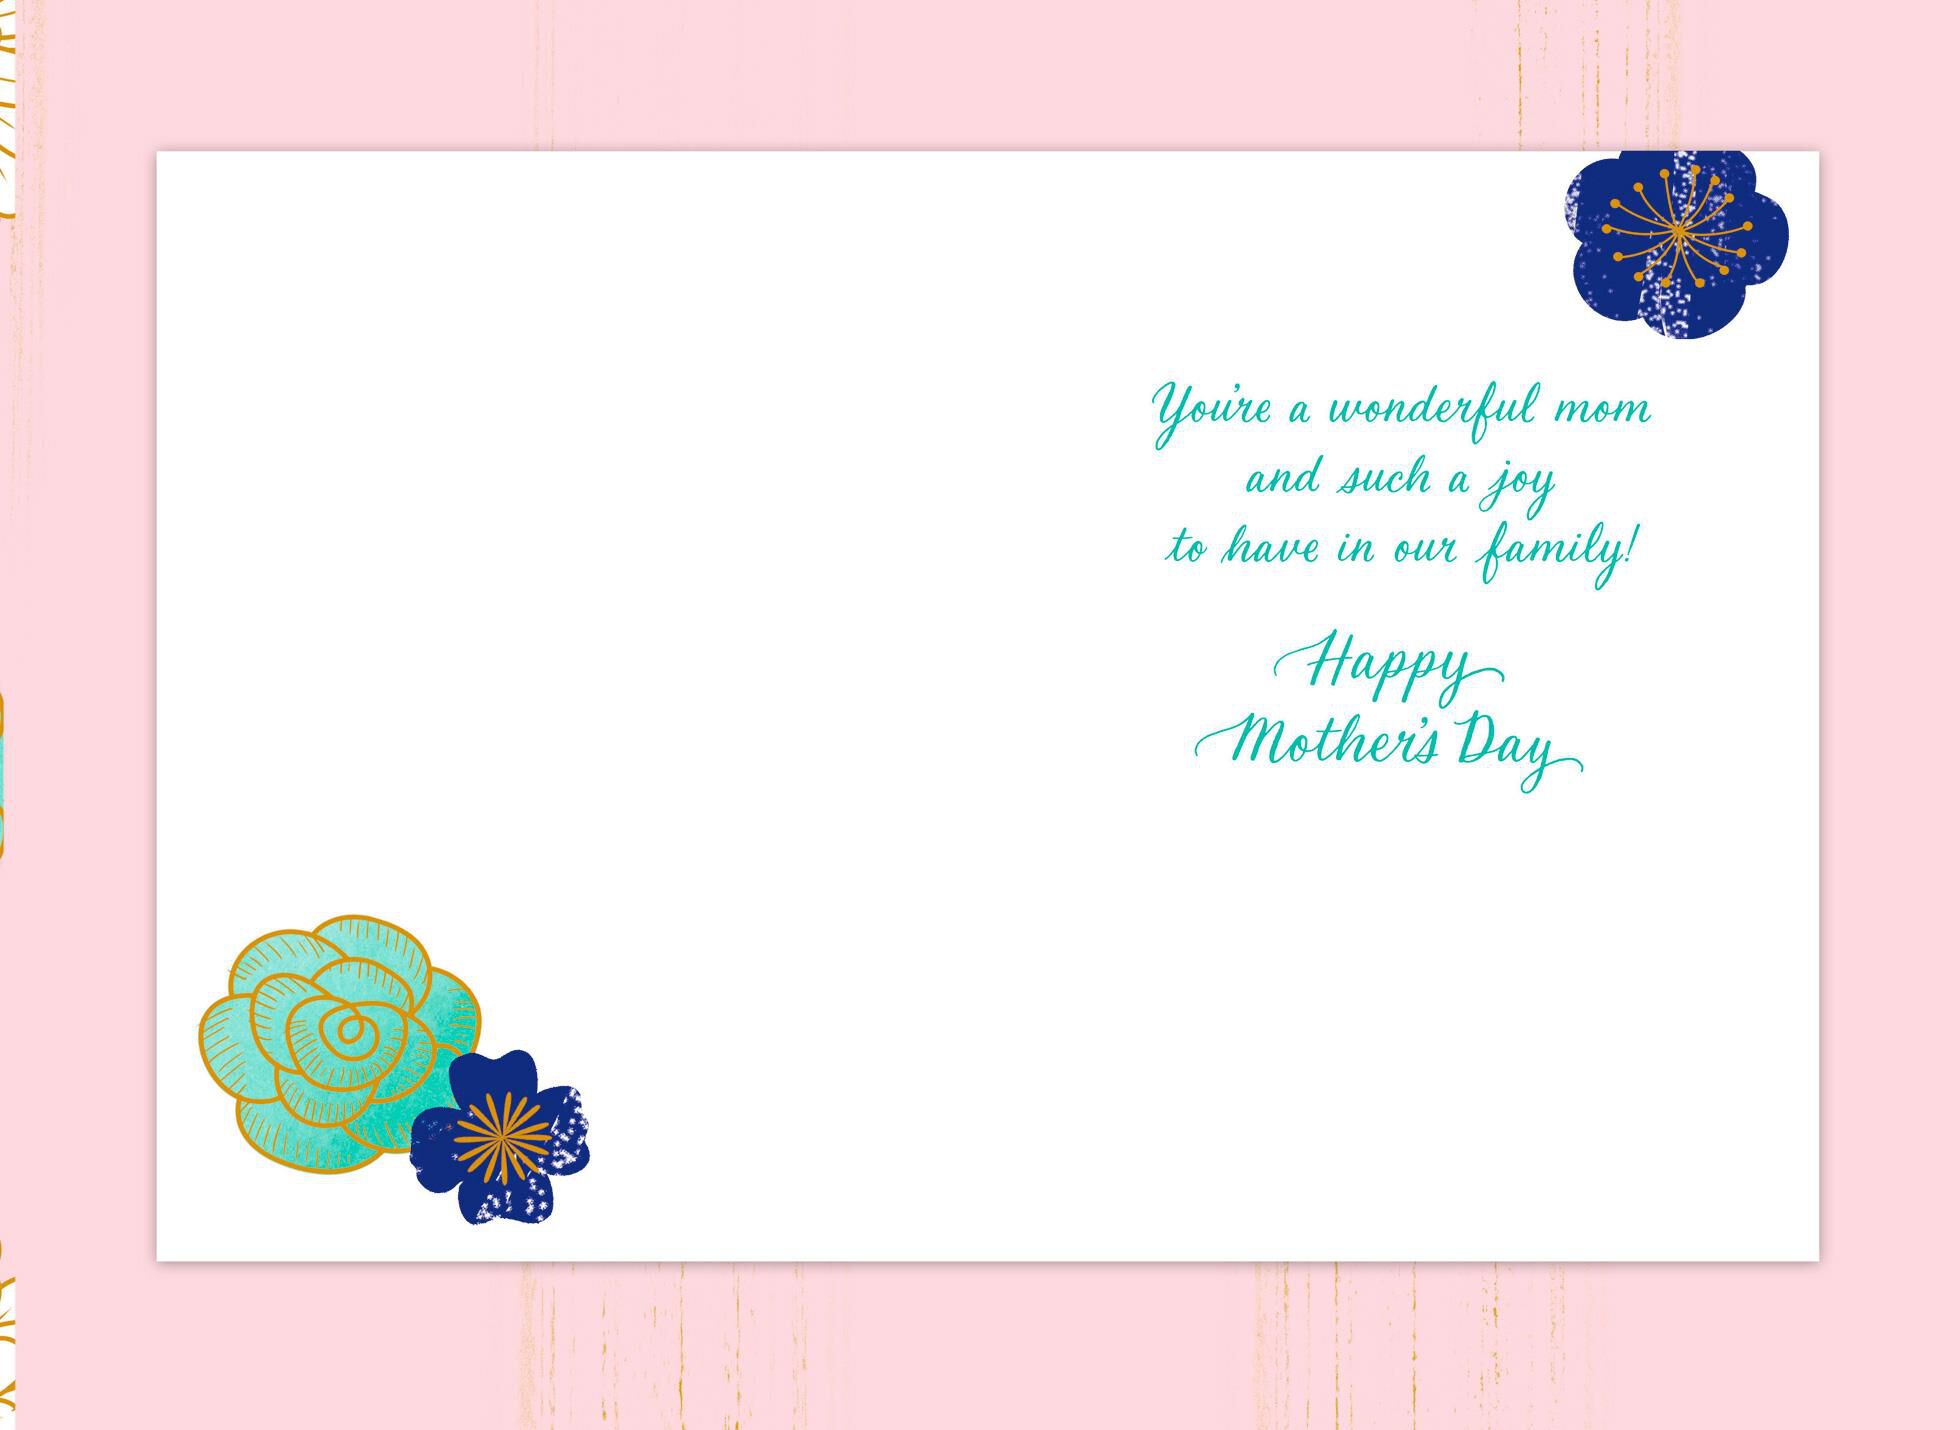 daughter-in-law-pink-floral-mother-s-day-card-greeting-cards-hallmark